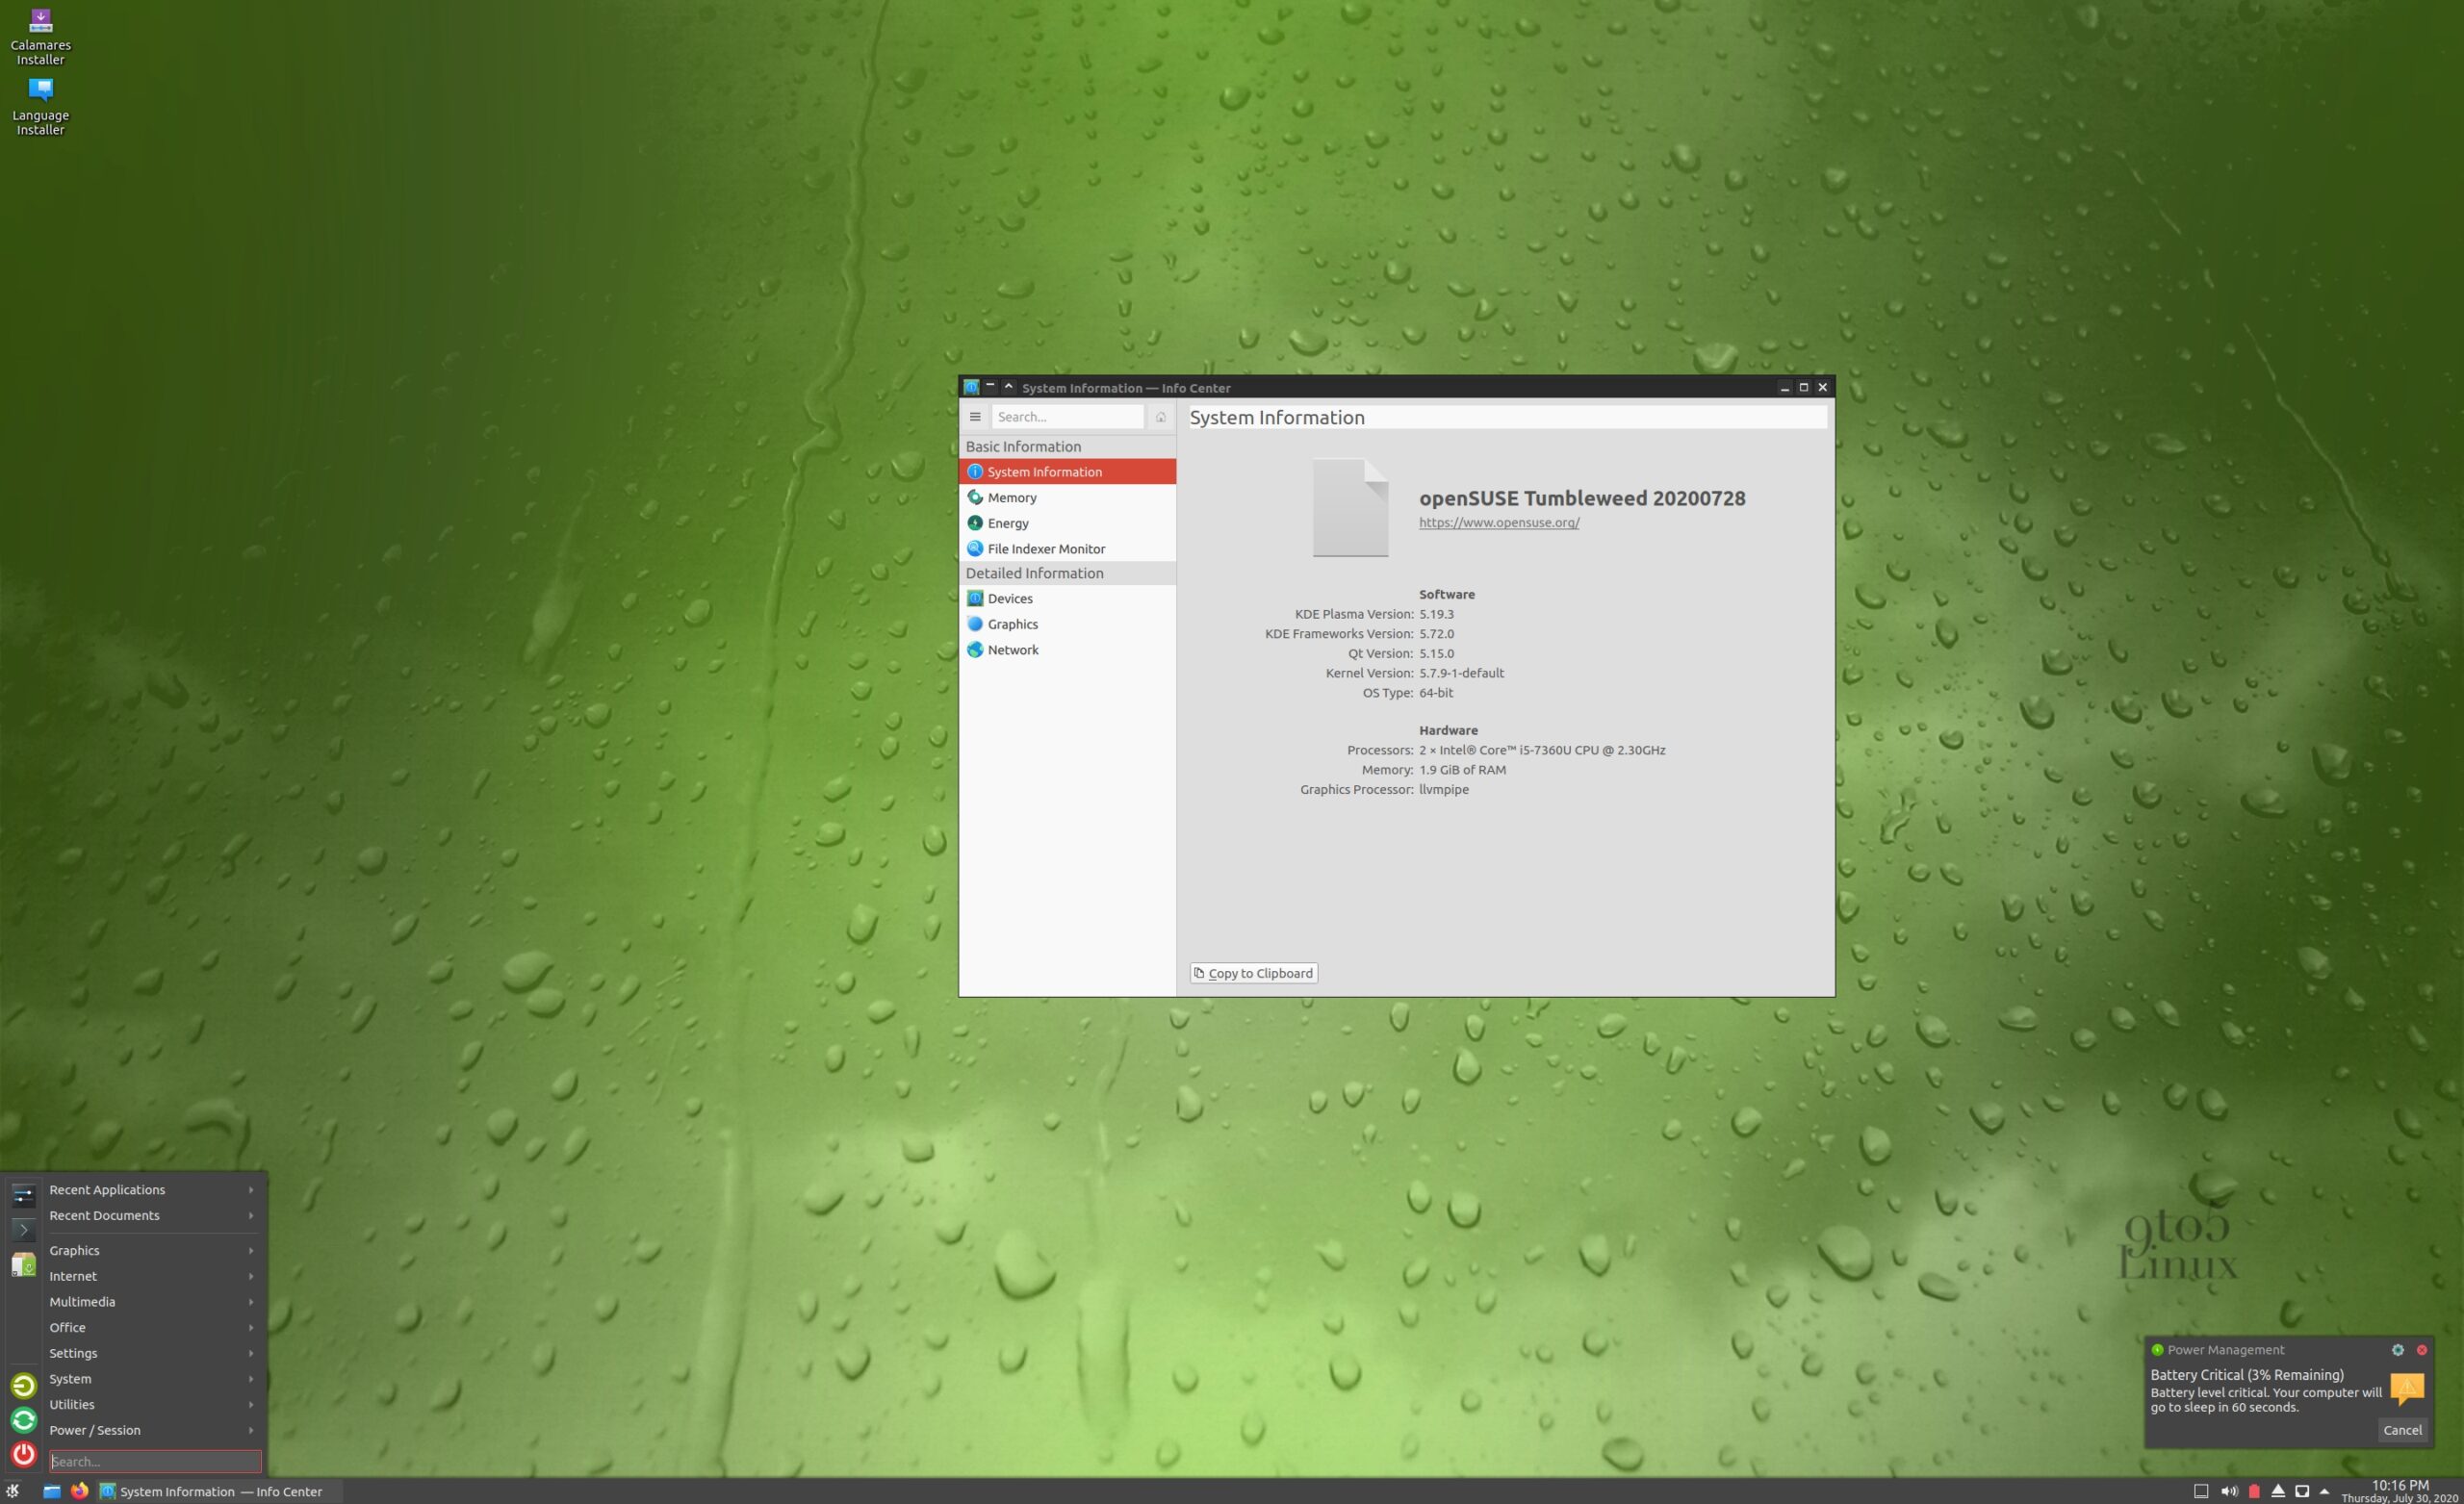 New GeckoLinux Rolling Editions Are Out Now, Based on openSUSE Tumbleweed